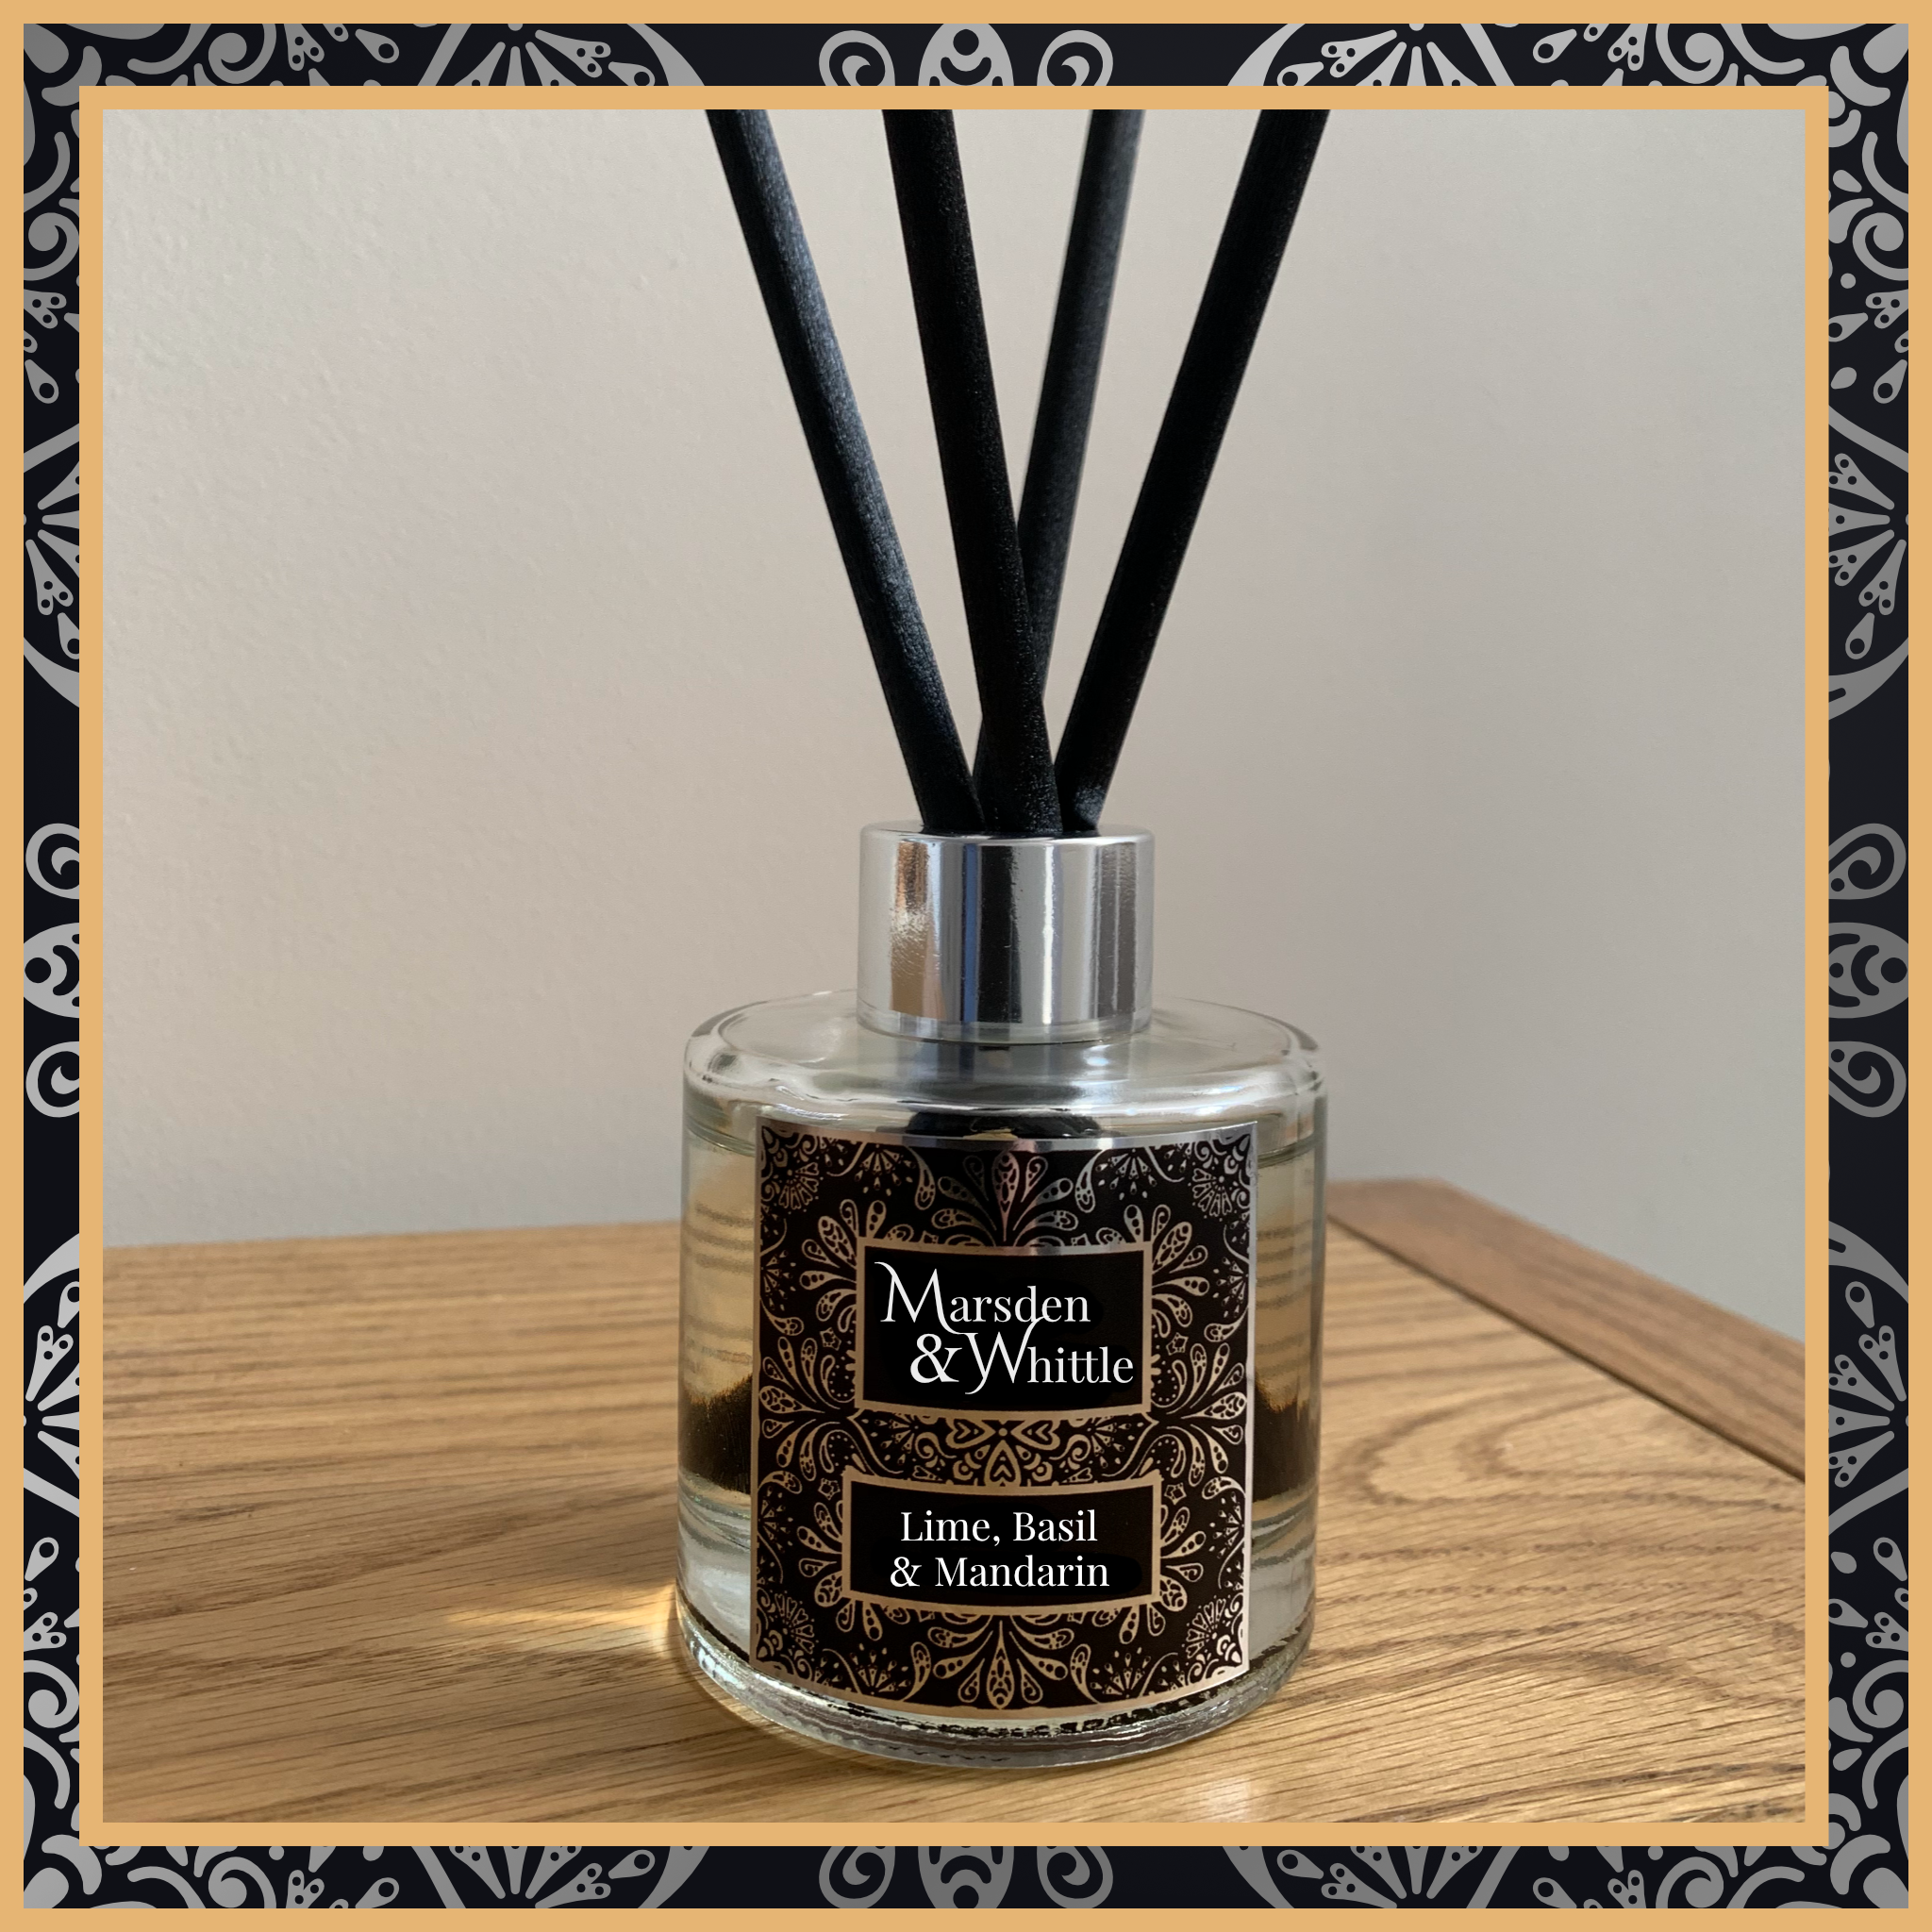 A Lime, Basil and Mandarin glass reed diffuser with black reeds and a silver chrome cap sitting on a wooden table.